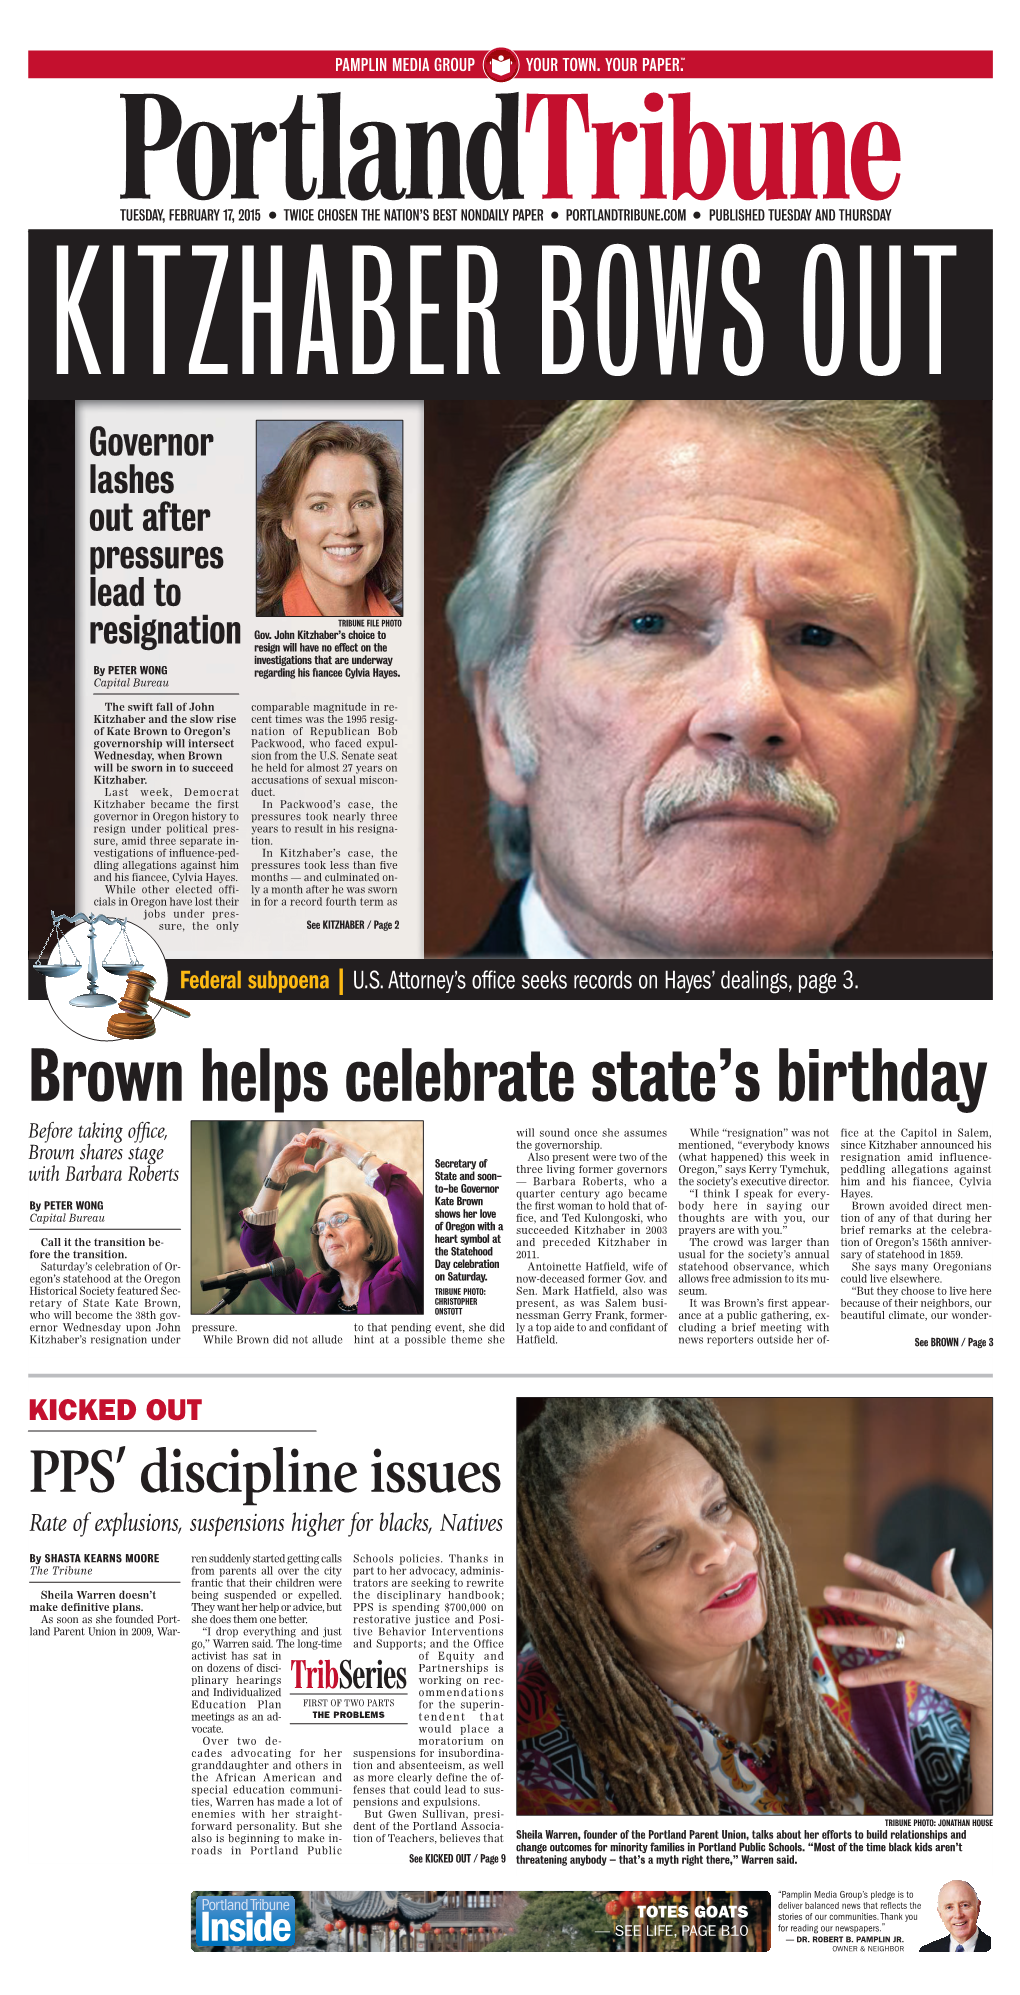 Brown Helps Celebrate State's Birthday